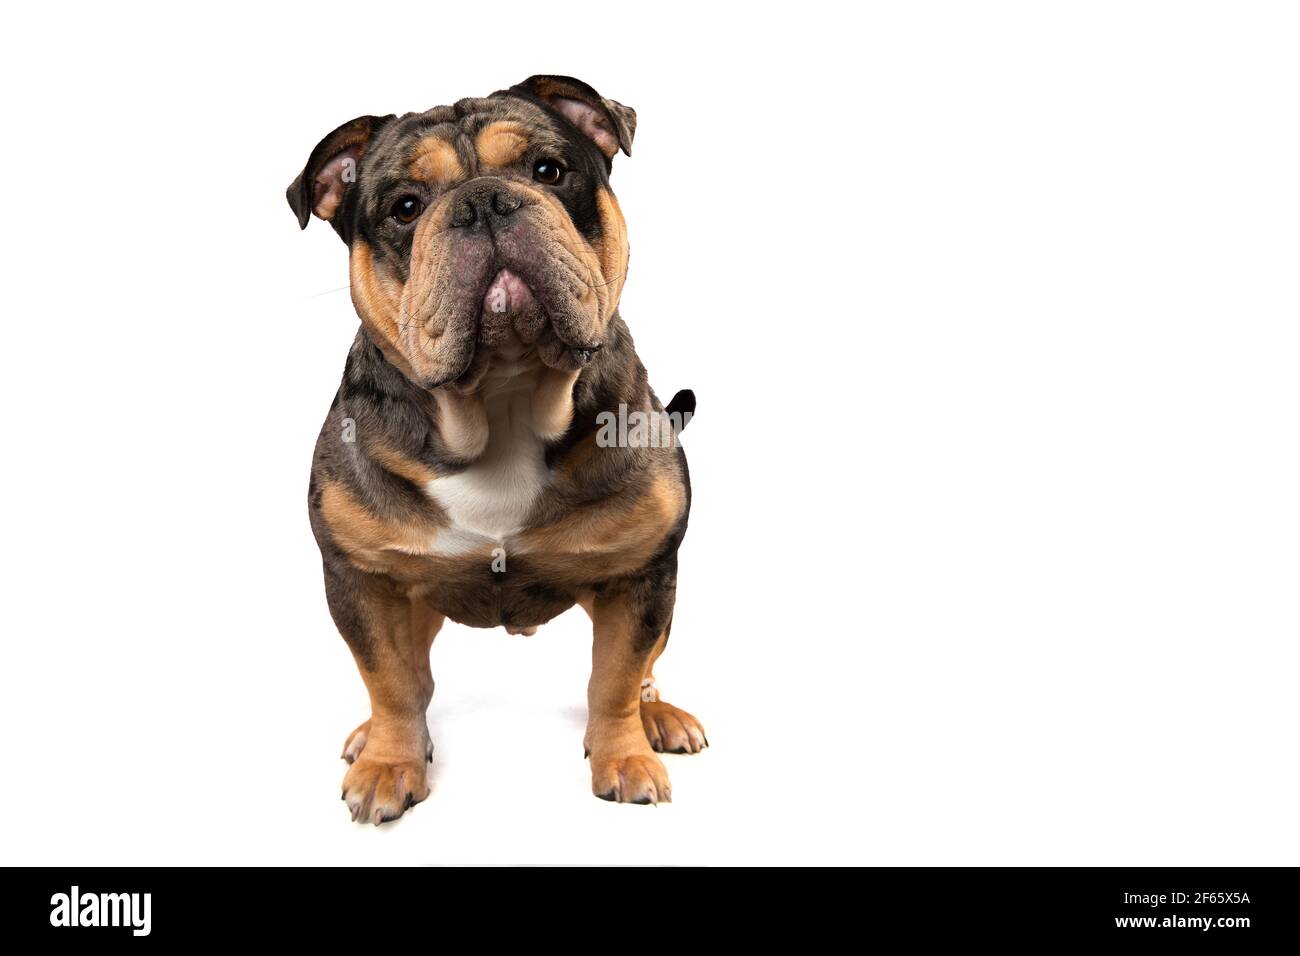 Old english bulldog dog standing and looking at the camera isolated on a white background Stock Photo